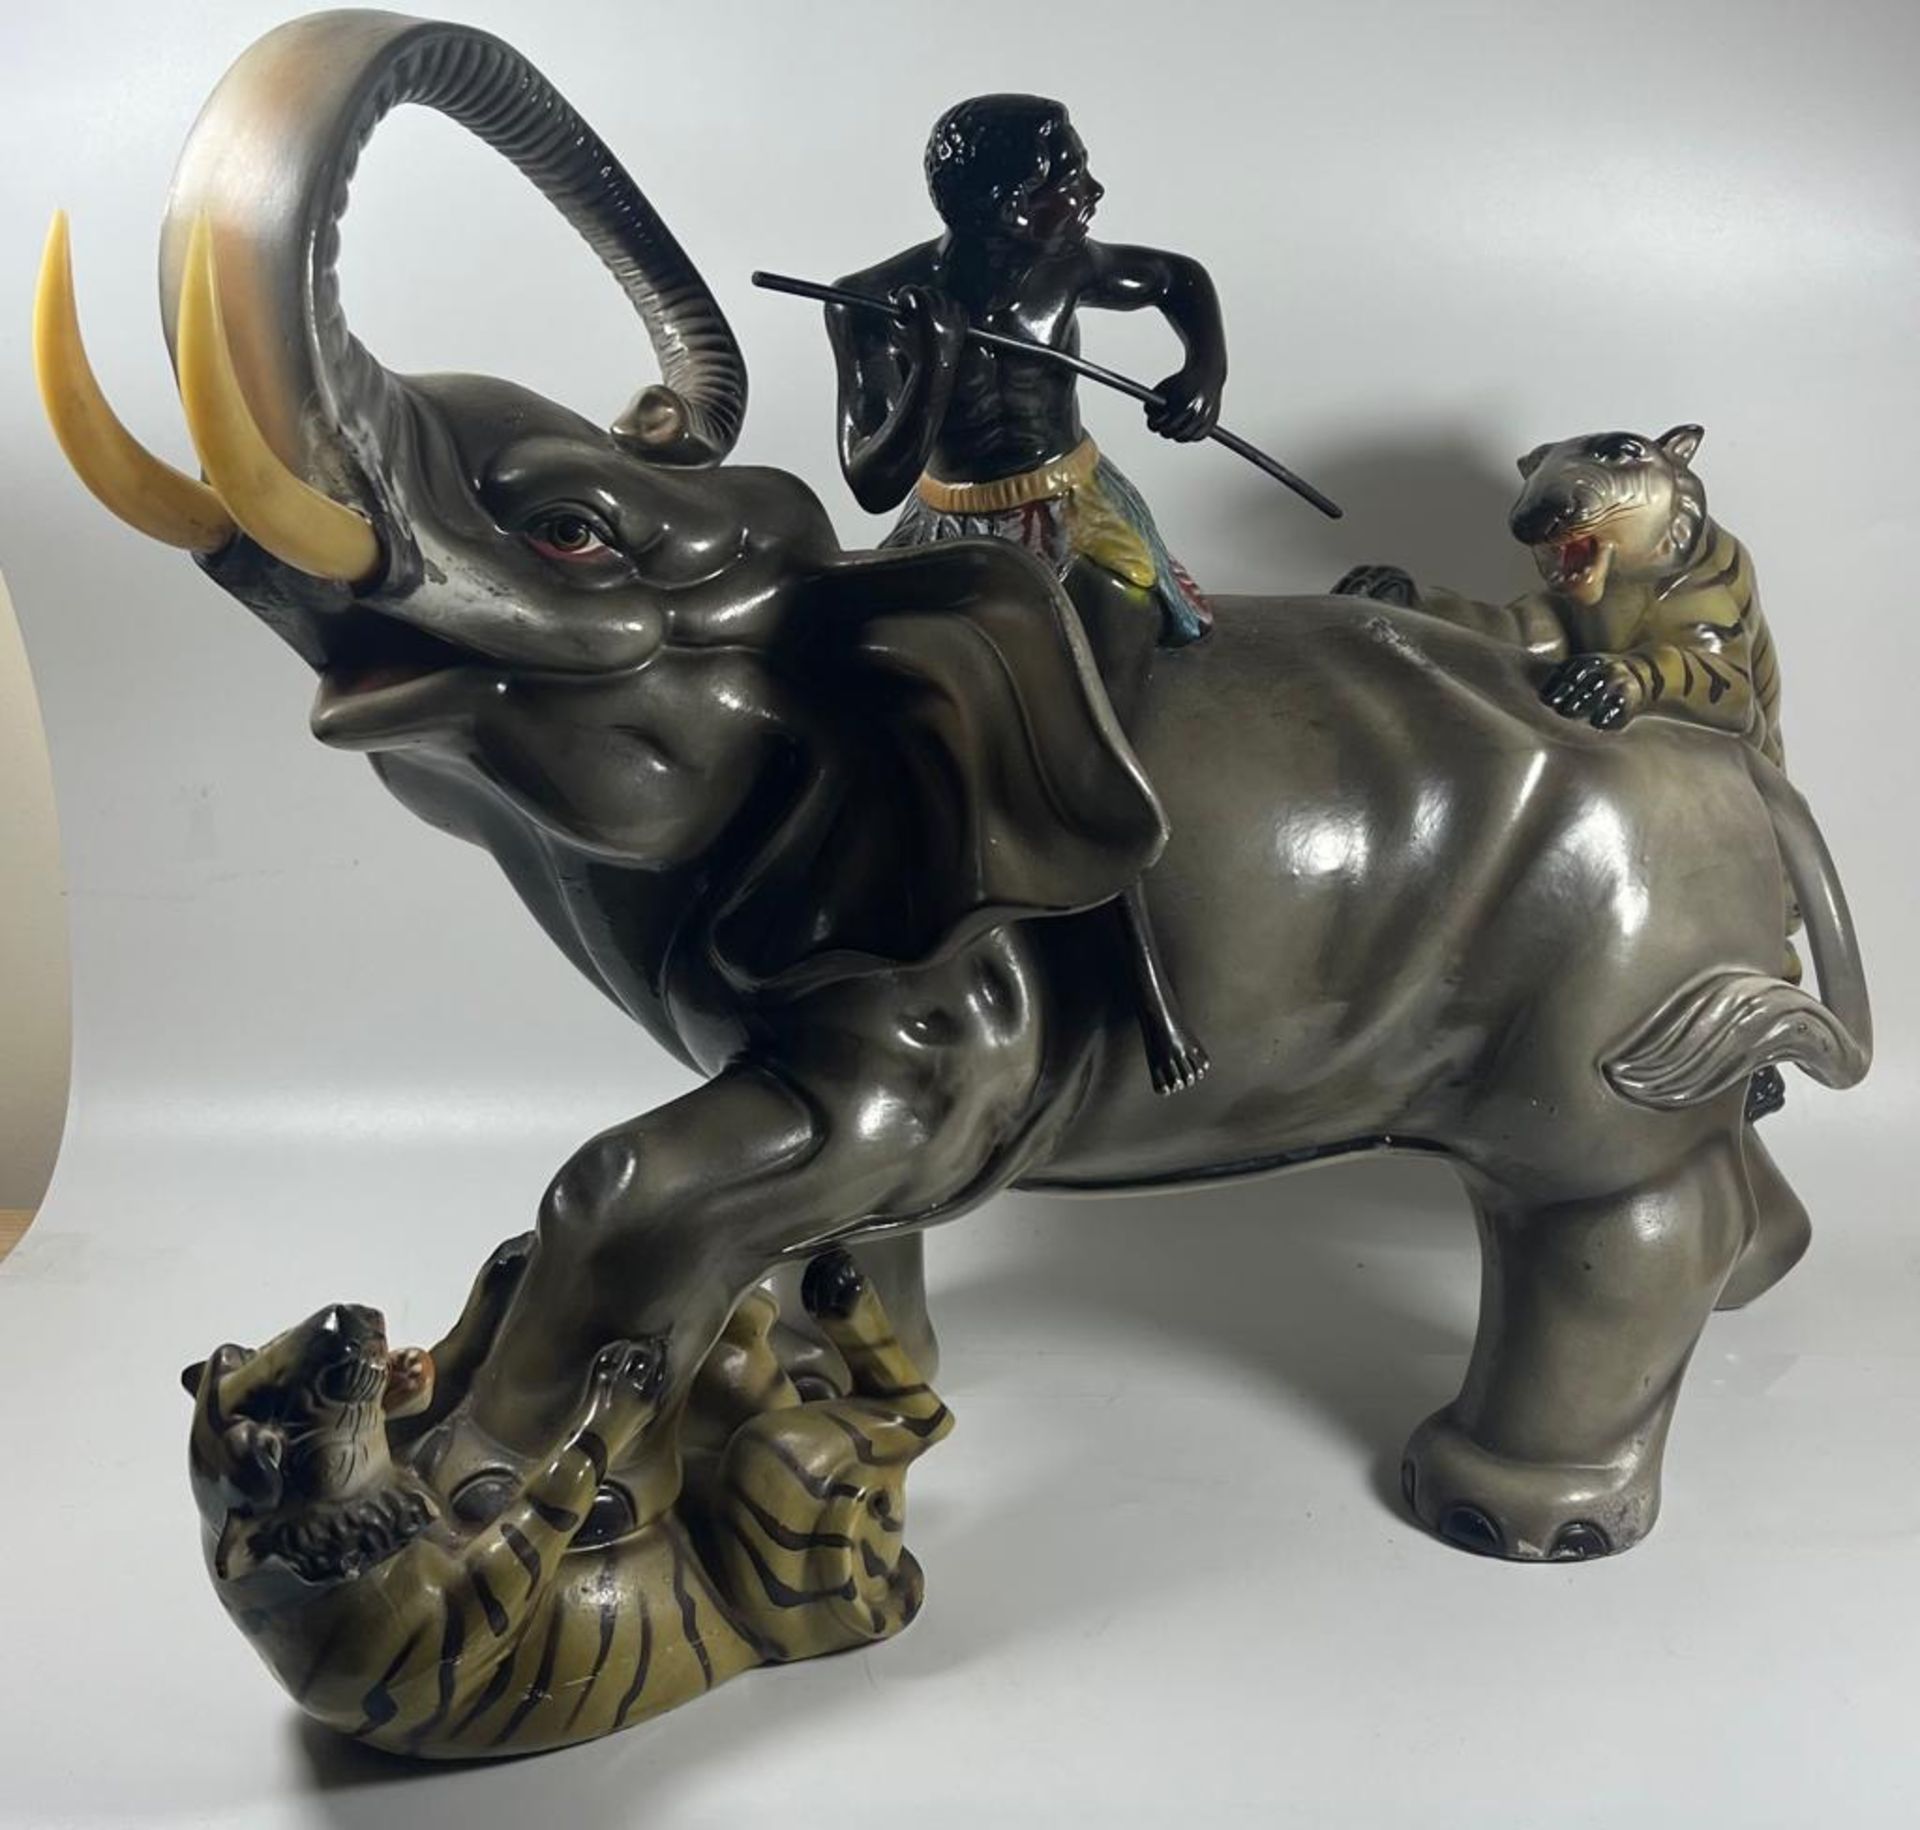 A LARGE 1970S ITALIAN POTTERY SCULPTURE OF AN ELEPHANT BEING ATTACKED BY TIGERS, LENGTH 49 CM